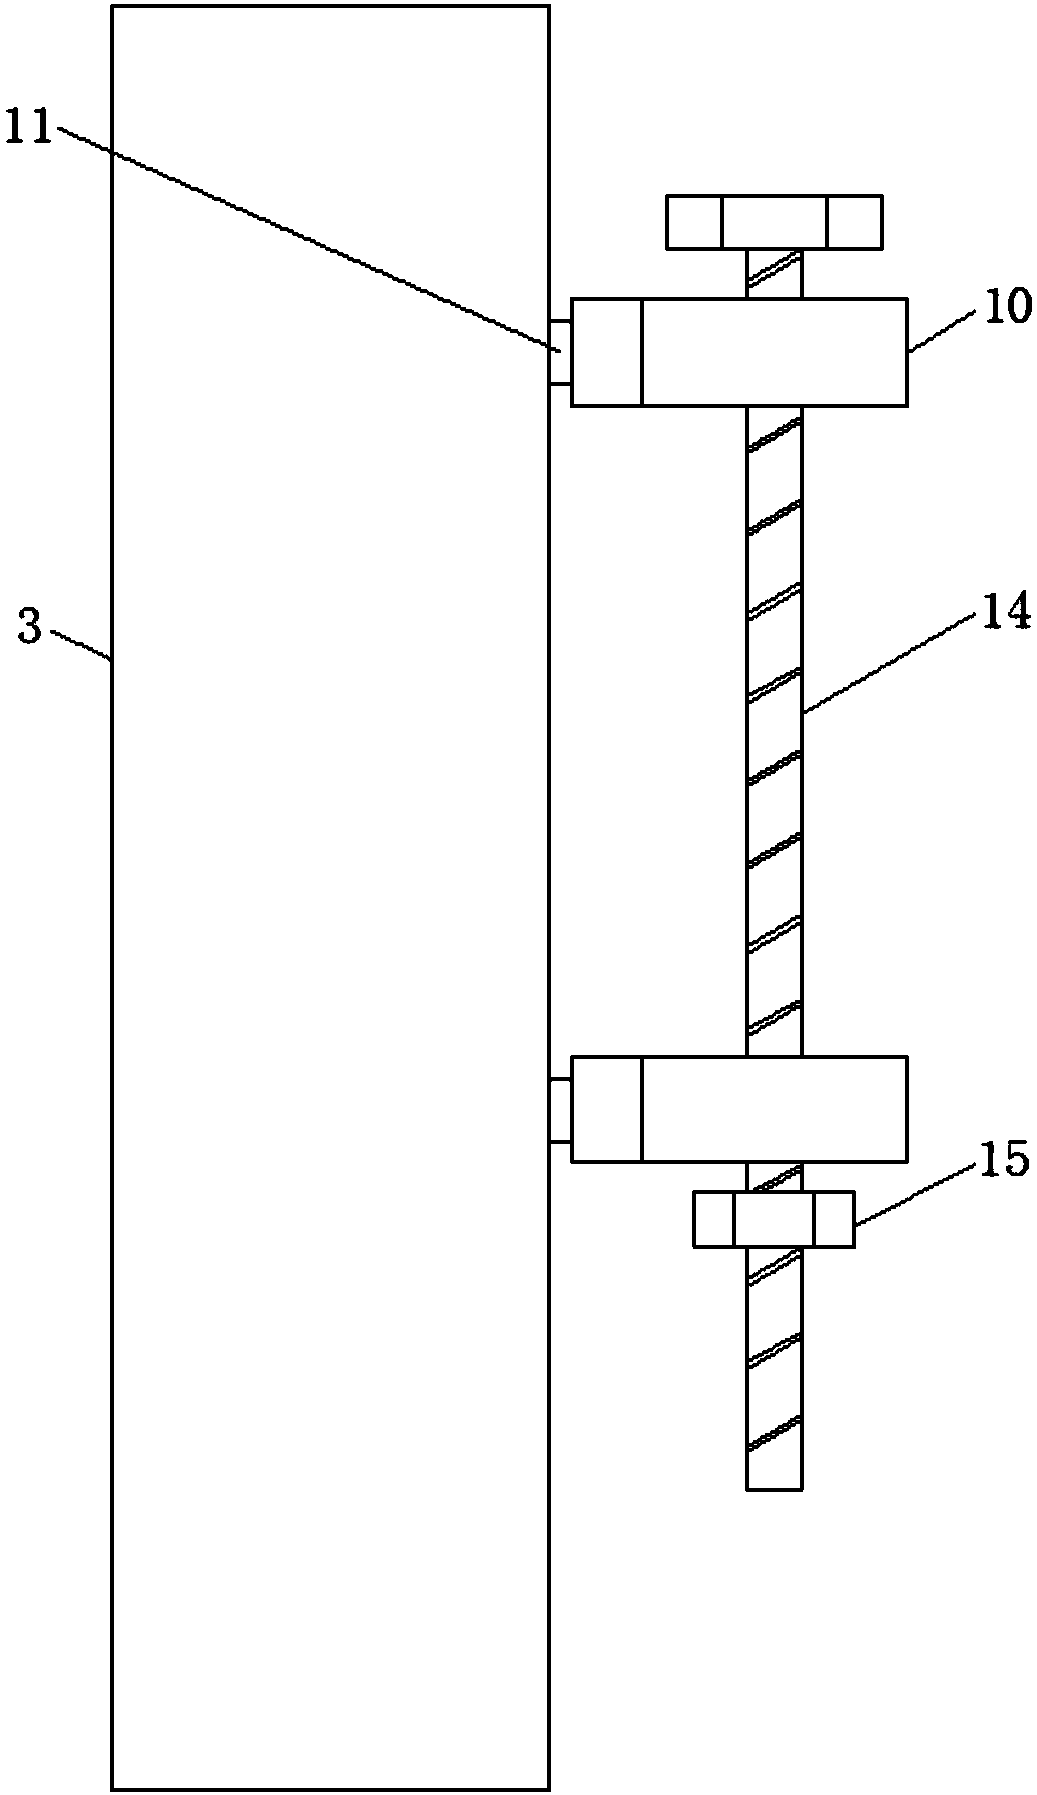 A positioning and cutting device for bridge construction